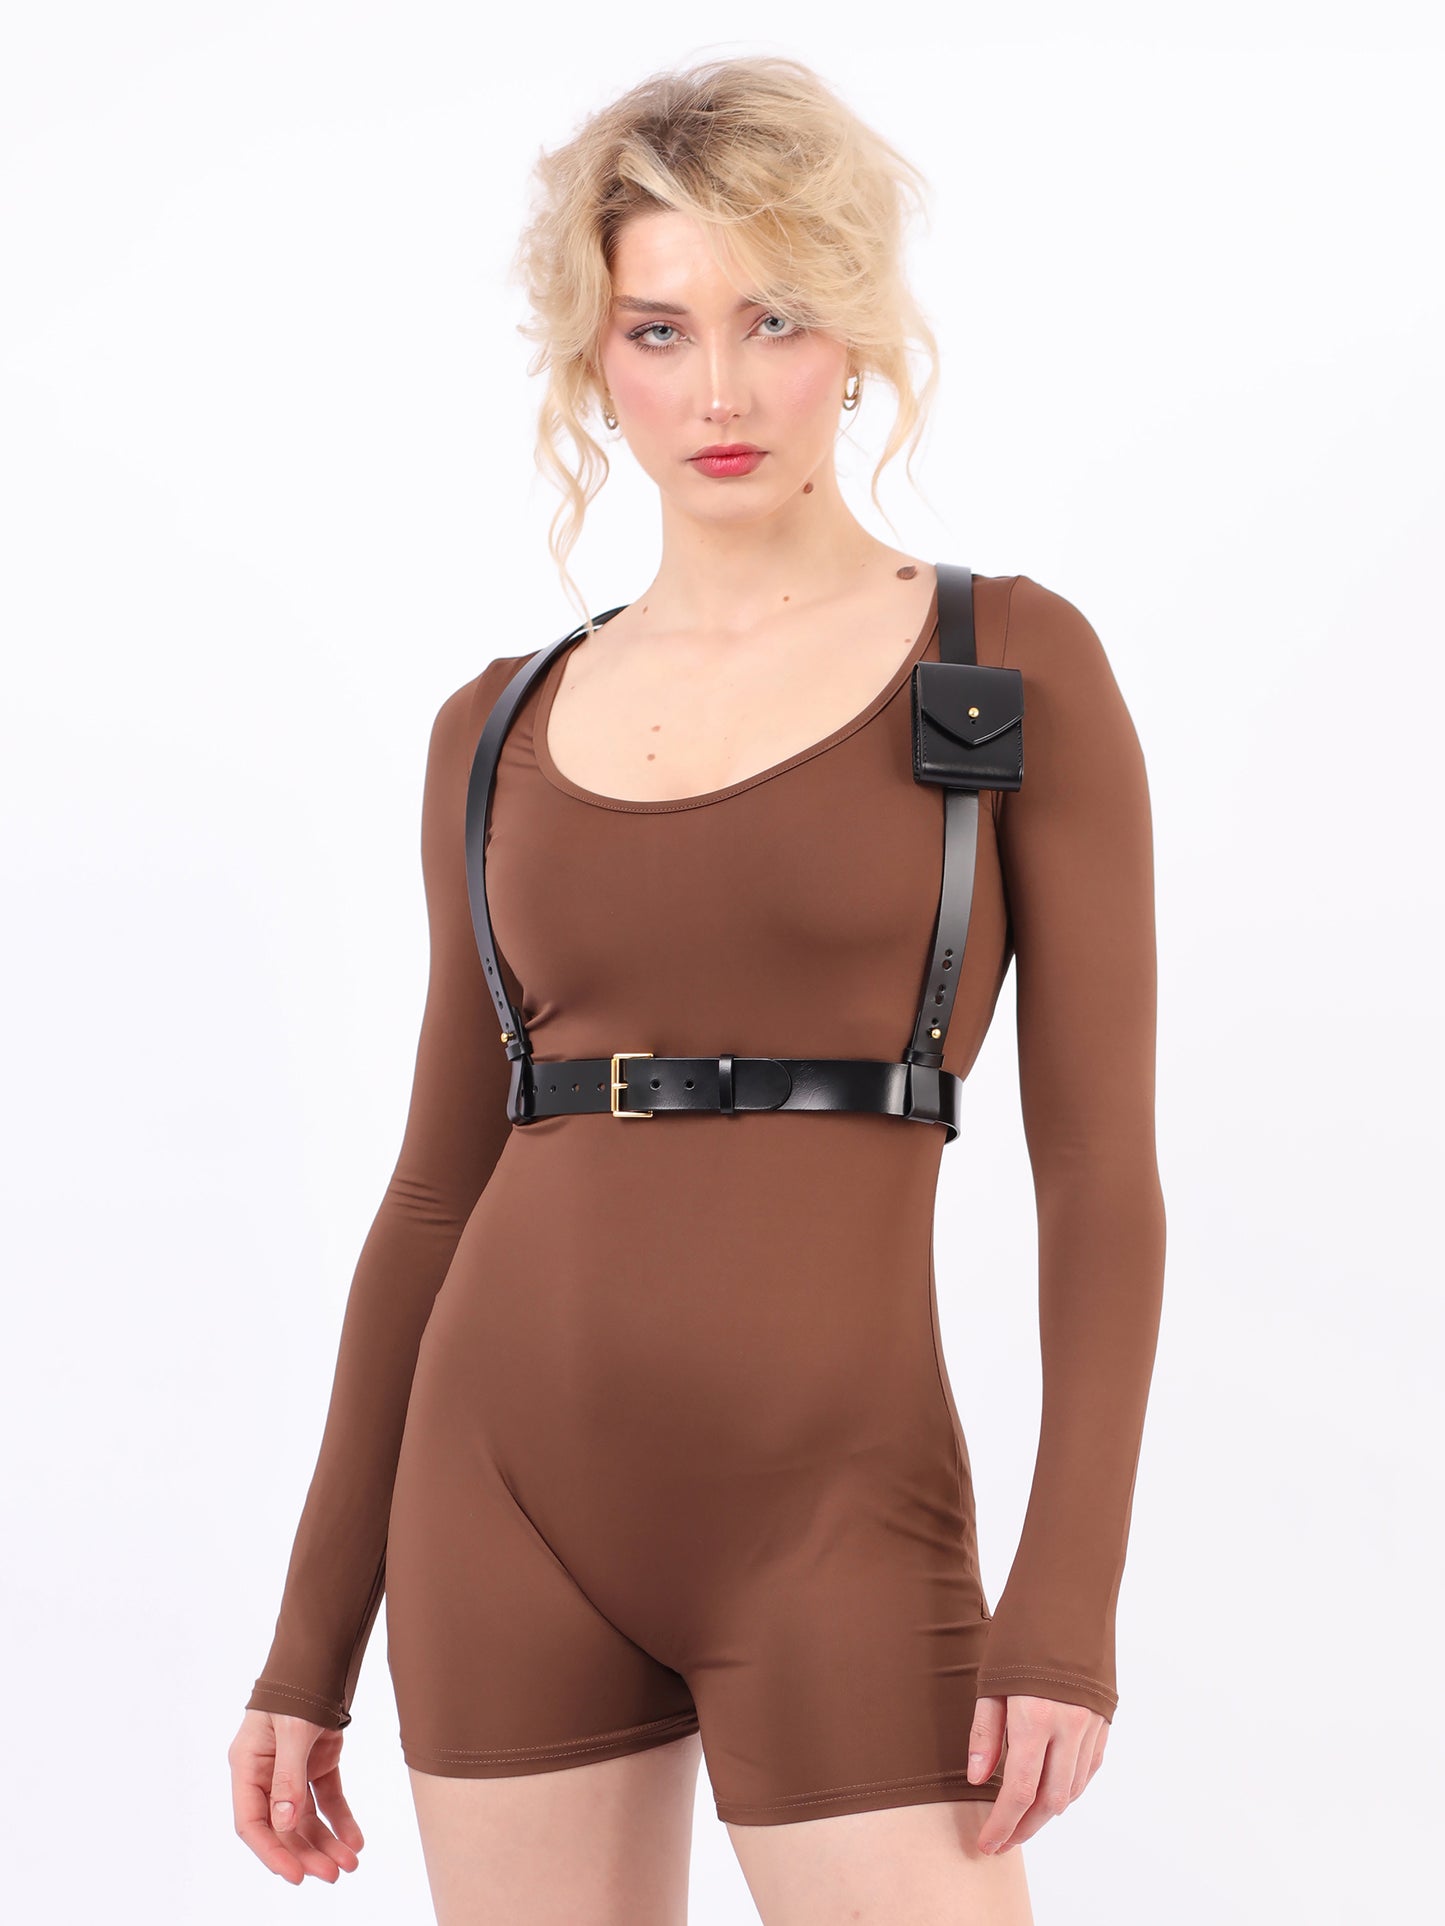 Black micro bag harness fited on model wearing brown jumpsuit.